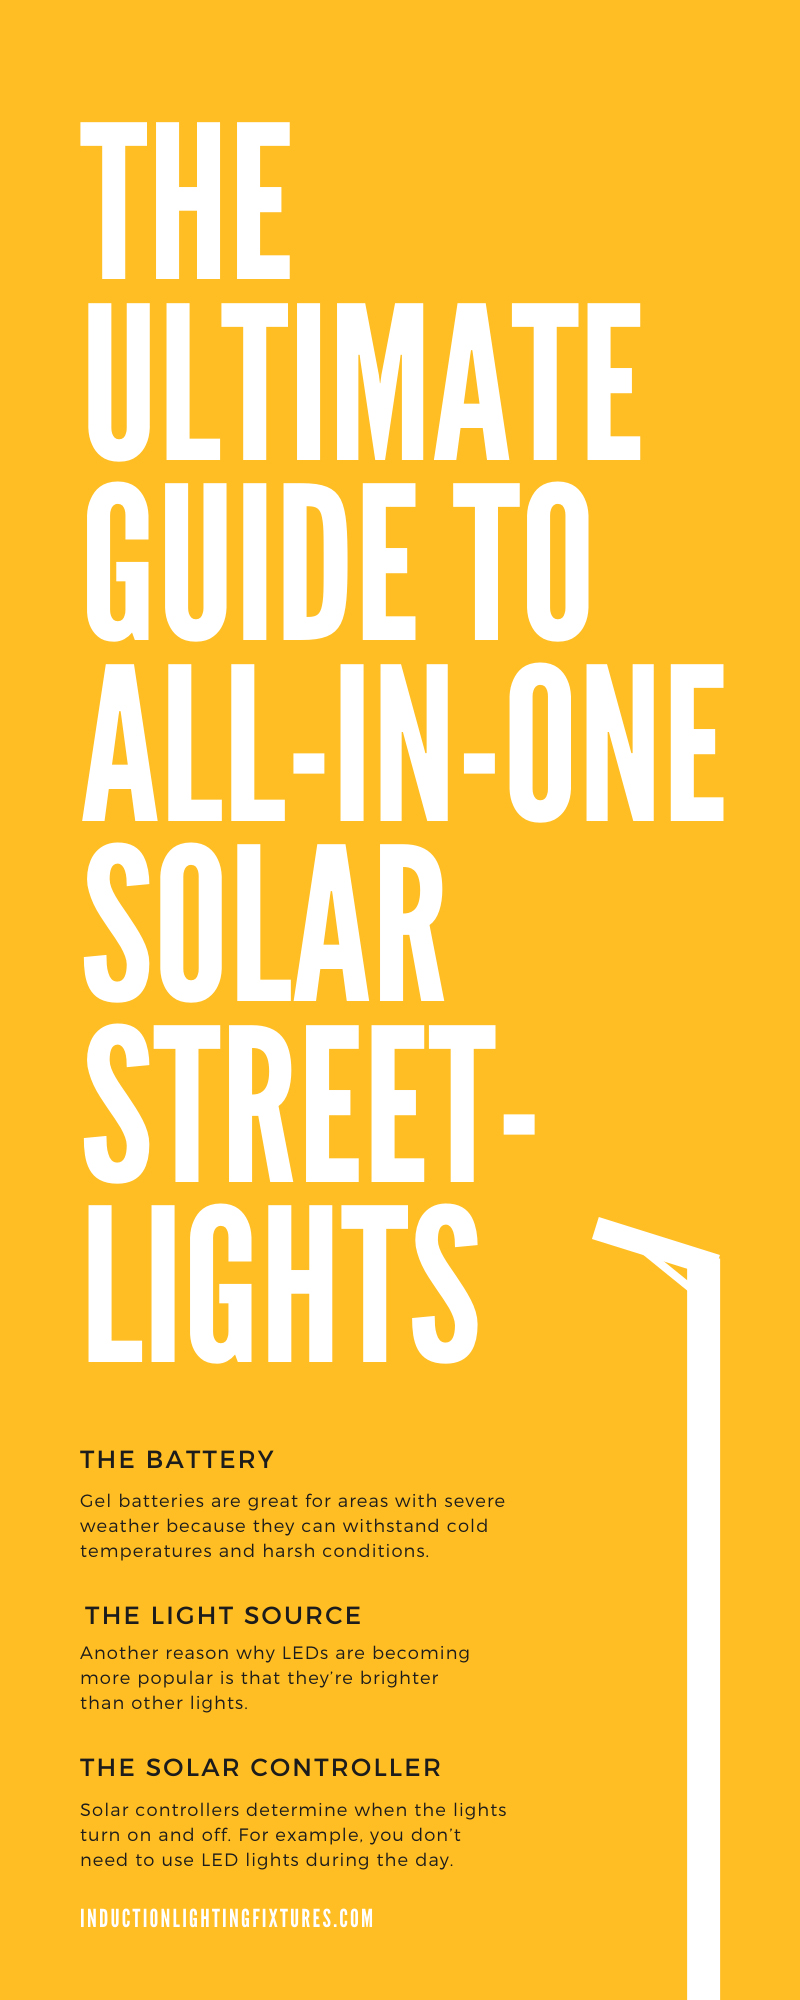 The Ultimate Guide to All-in-One Solar Streetlights